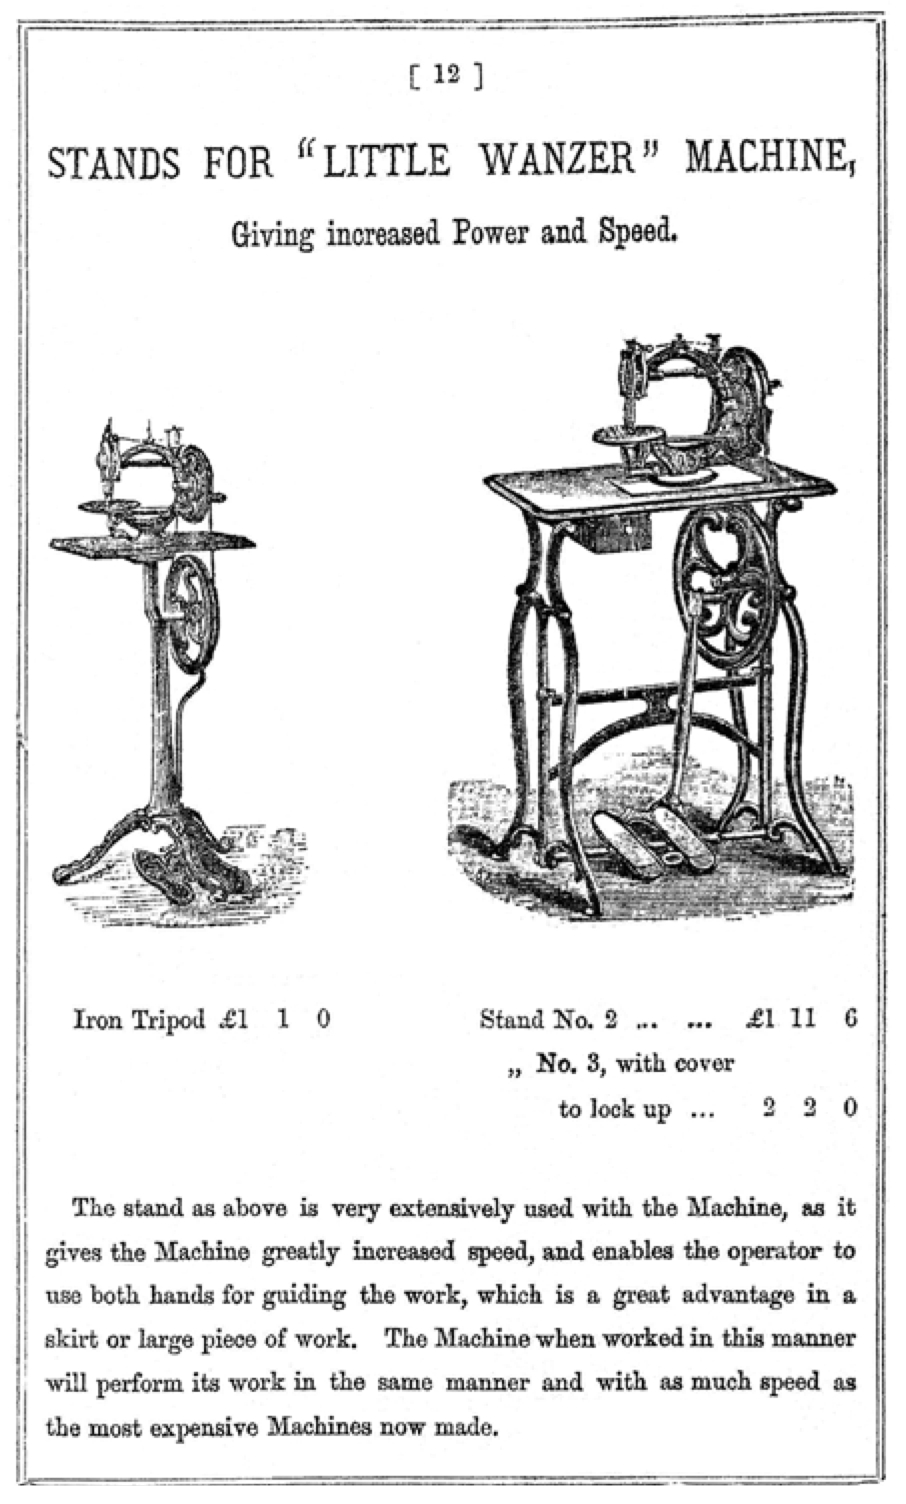 Stands offered for the Little Wanzer Sewing Machine